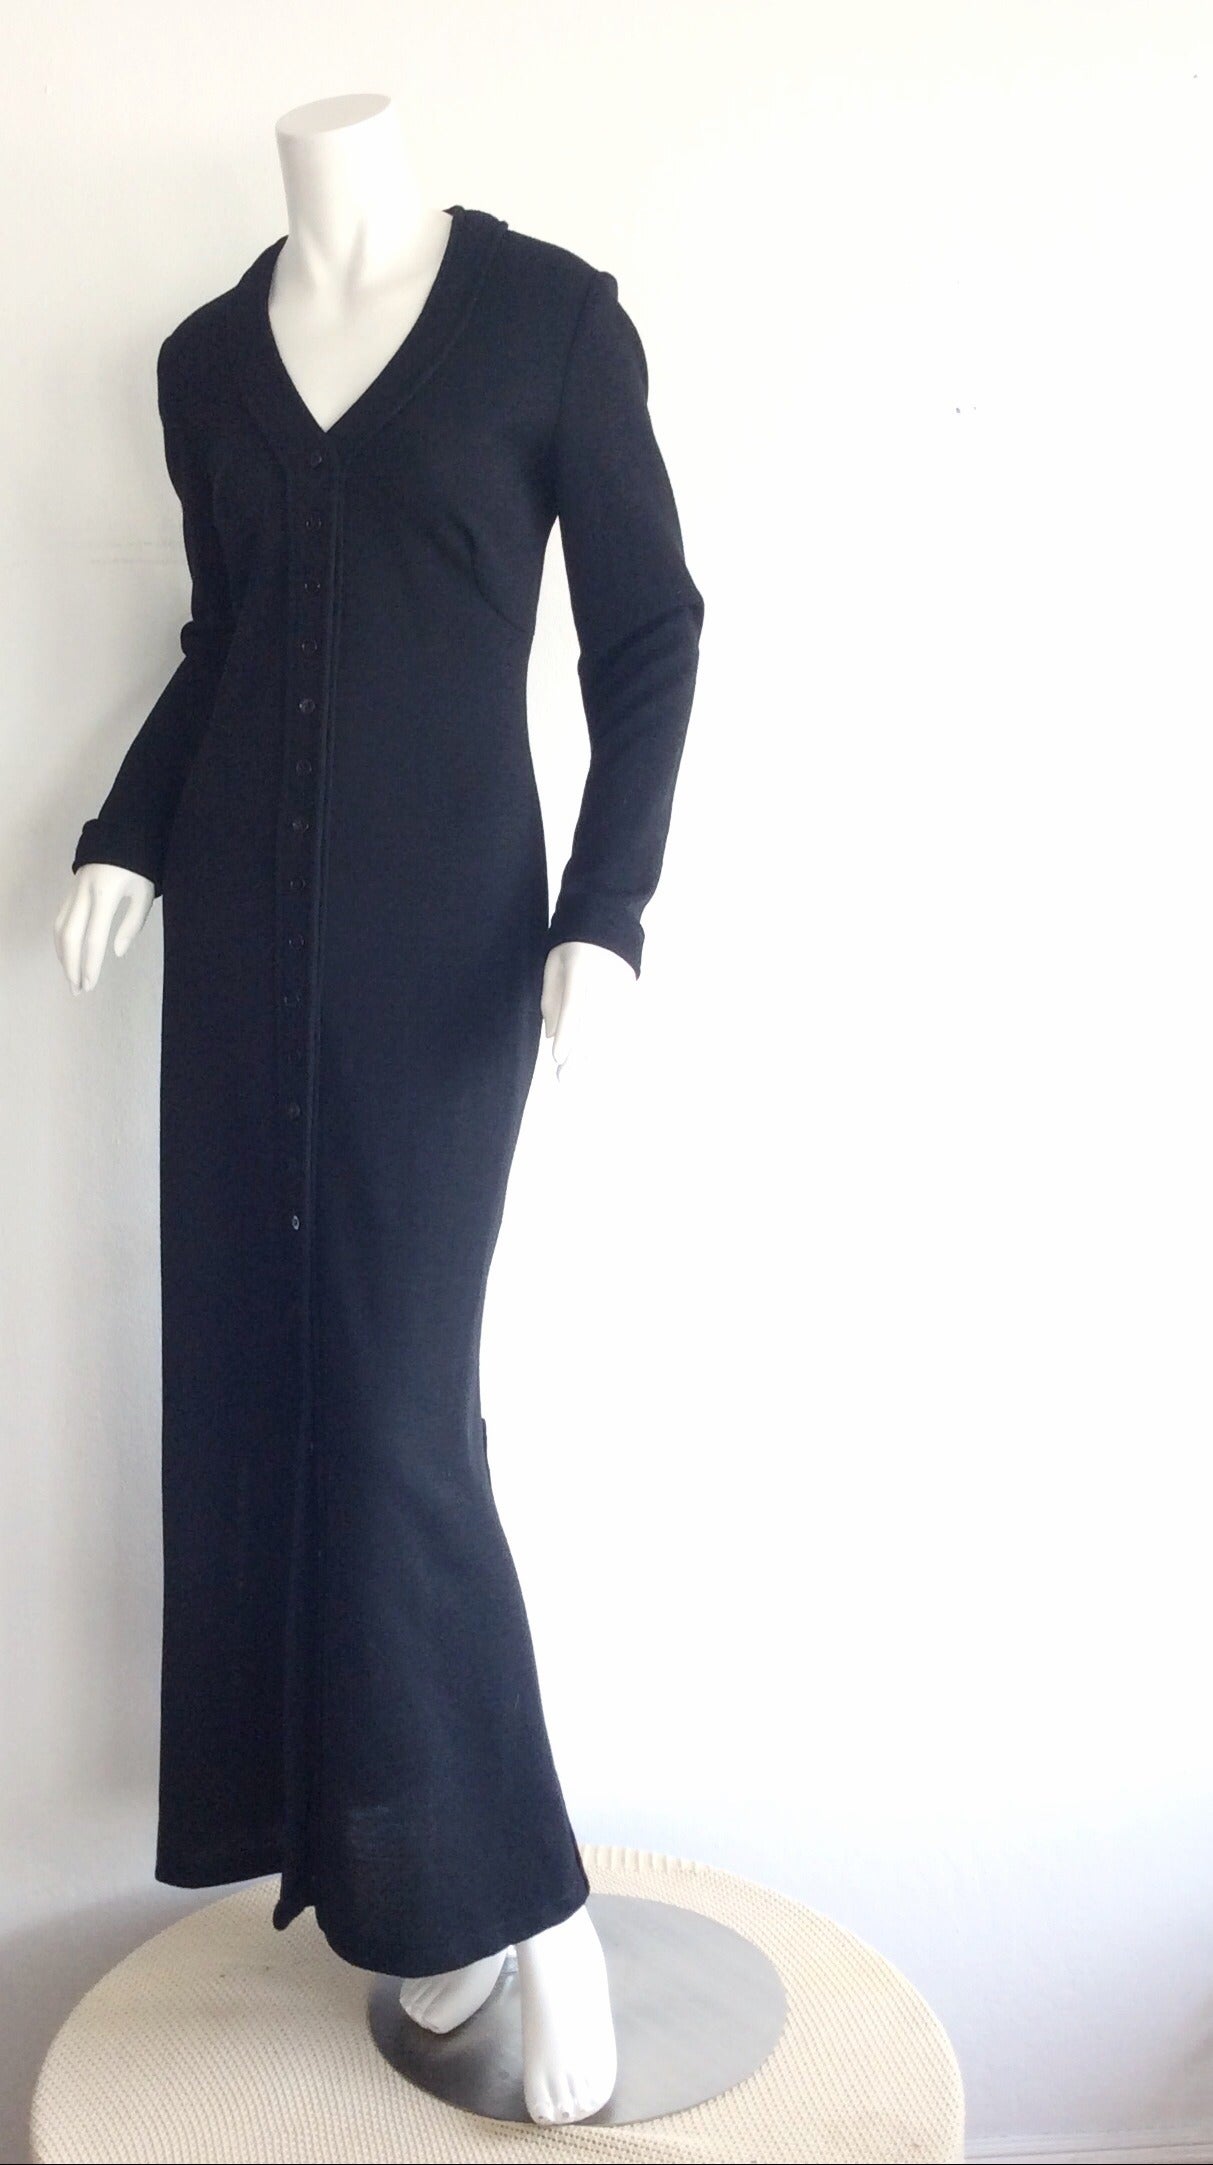 Incredible Vintage Mary Quant for Bonwit Teller Black Wool Shirt Dress 2